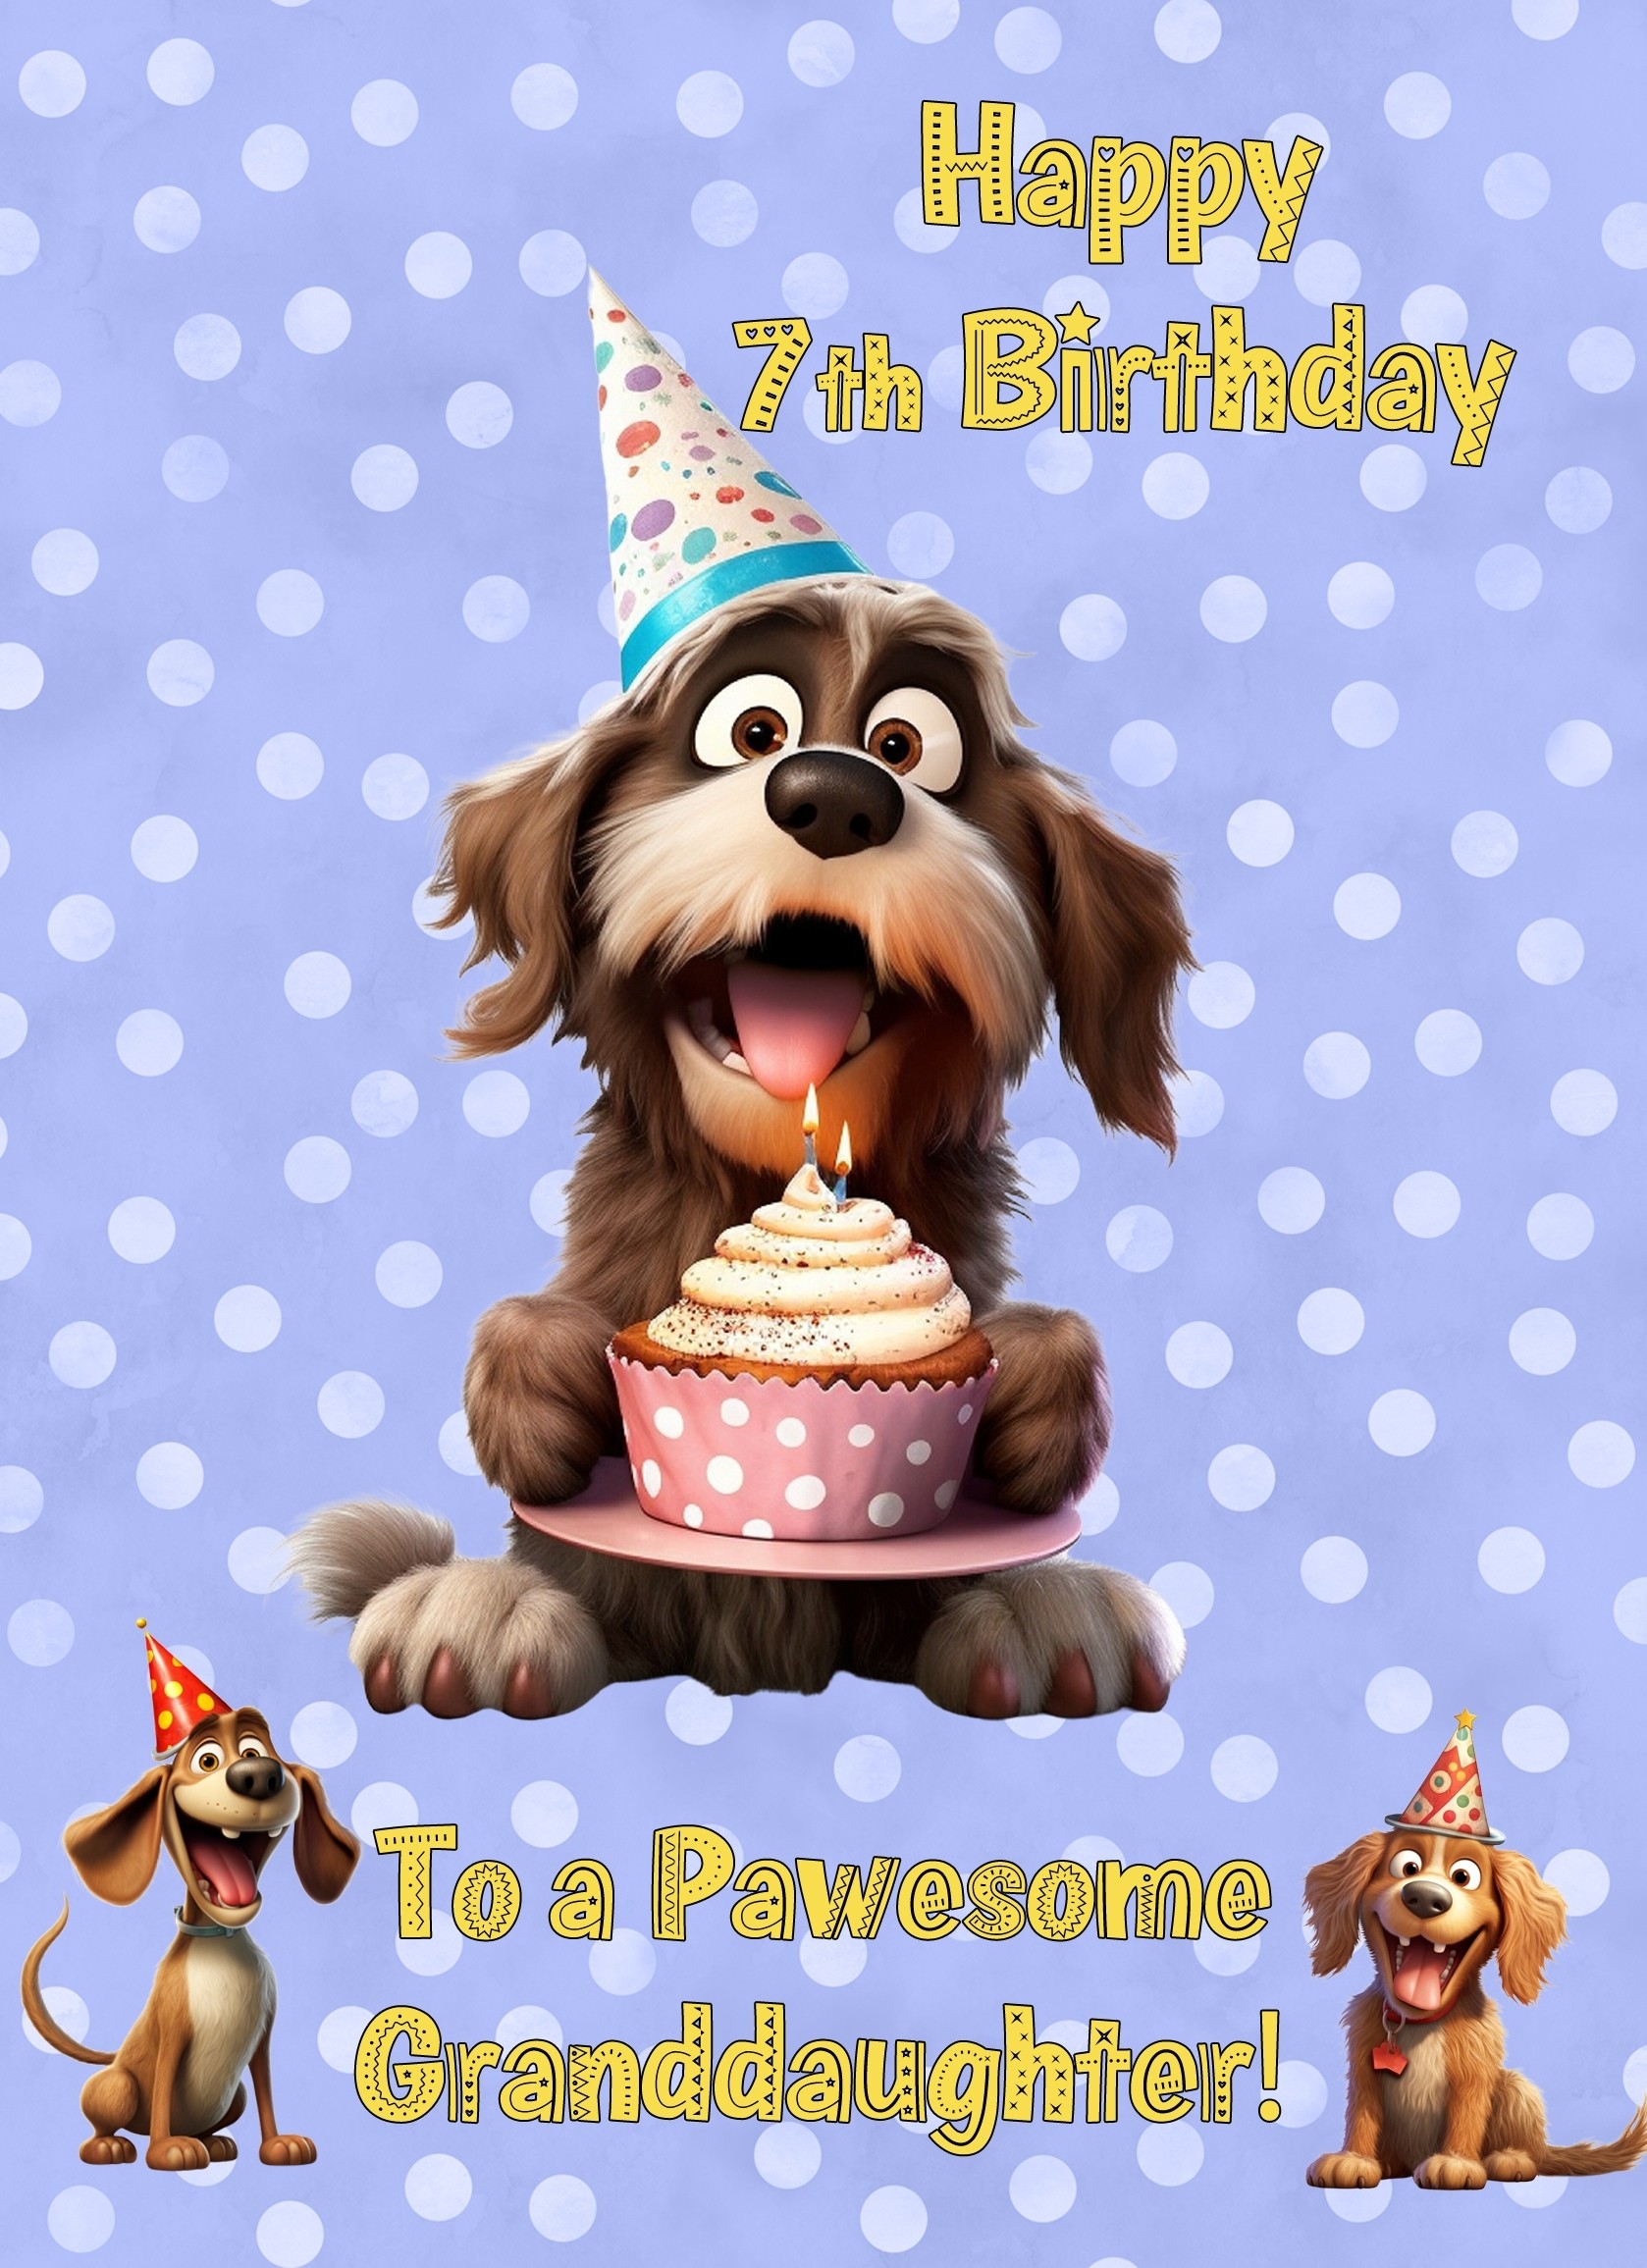 Granddaughter 7th Birthday Card (Funny Dog Humour)